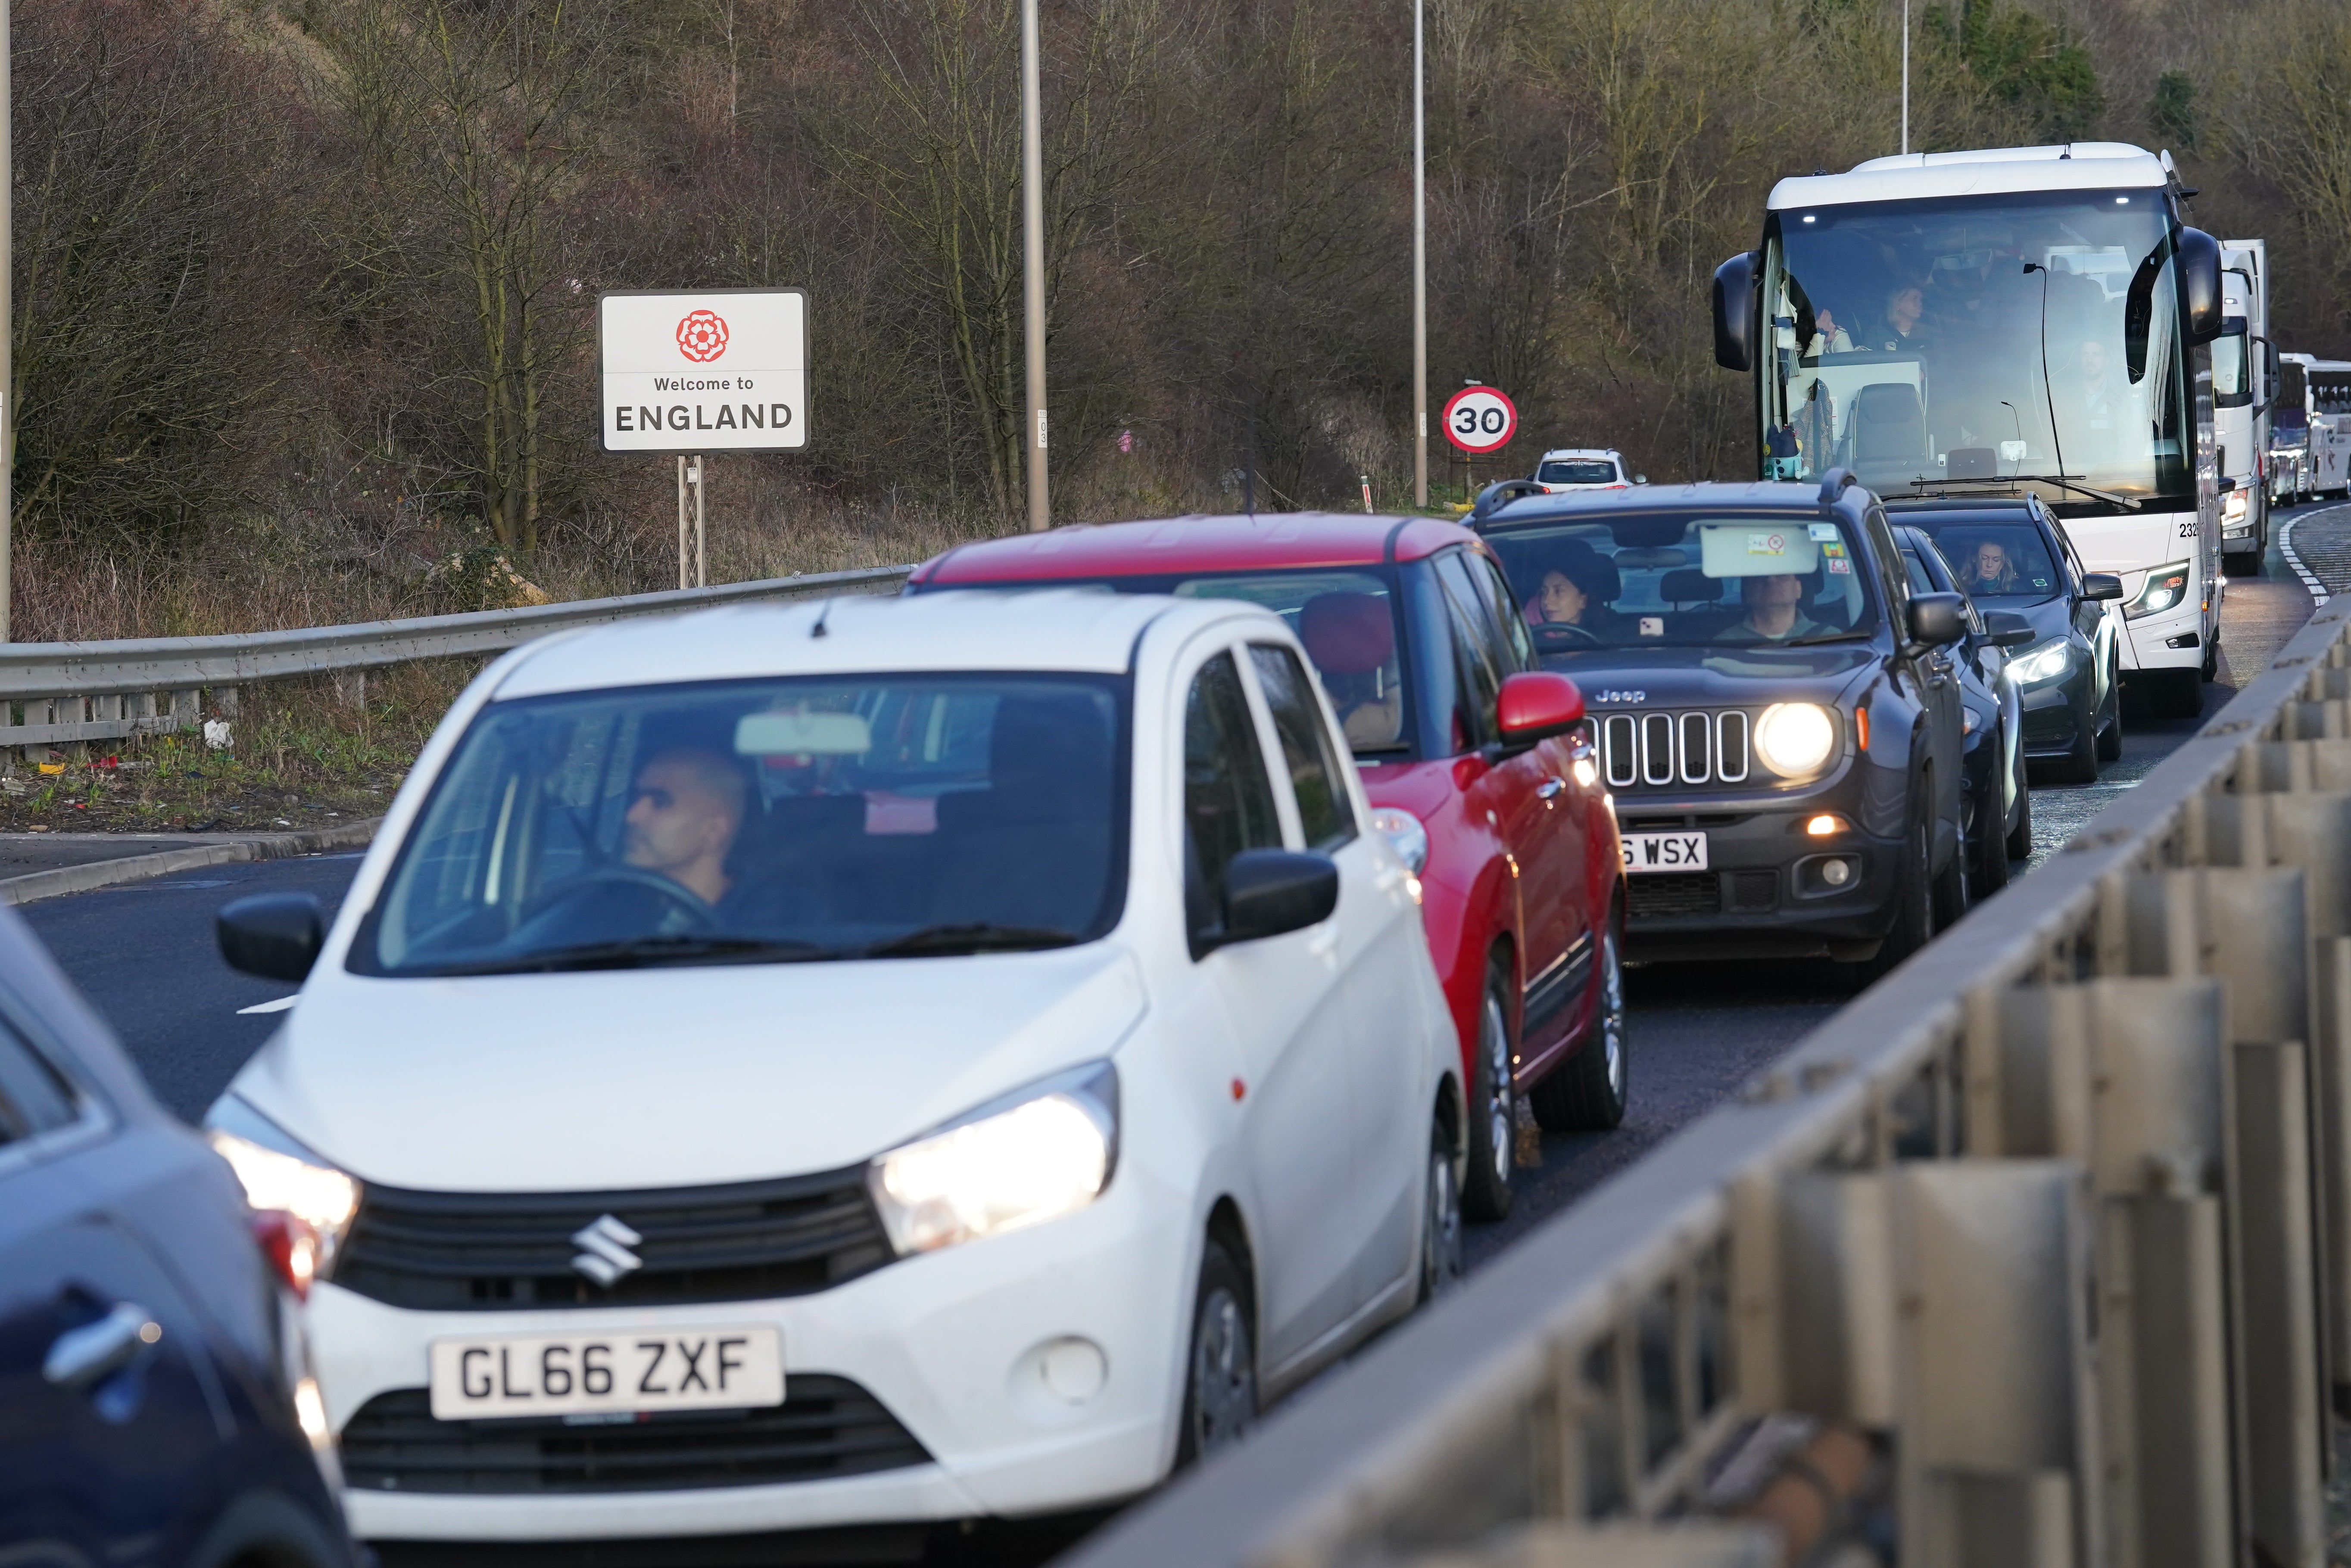 Waiting times reached 90 minutes at border control on Saturday morning at the Port of Dover